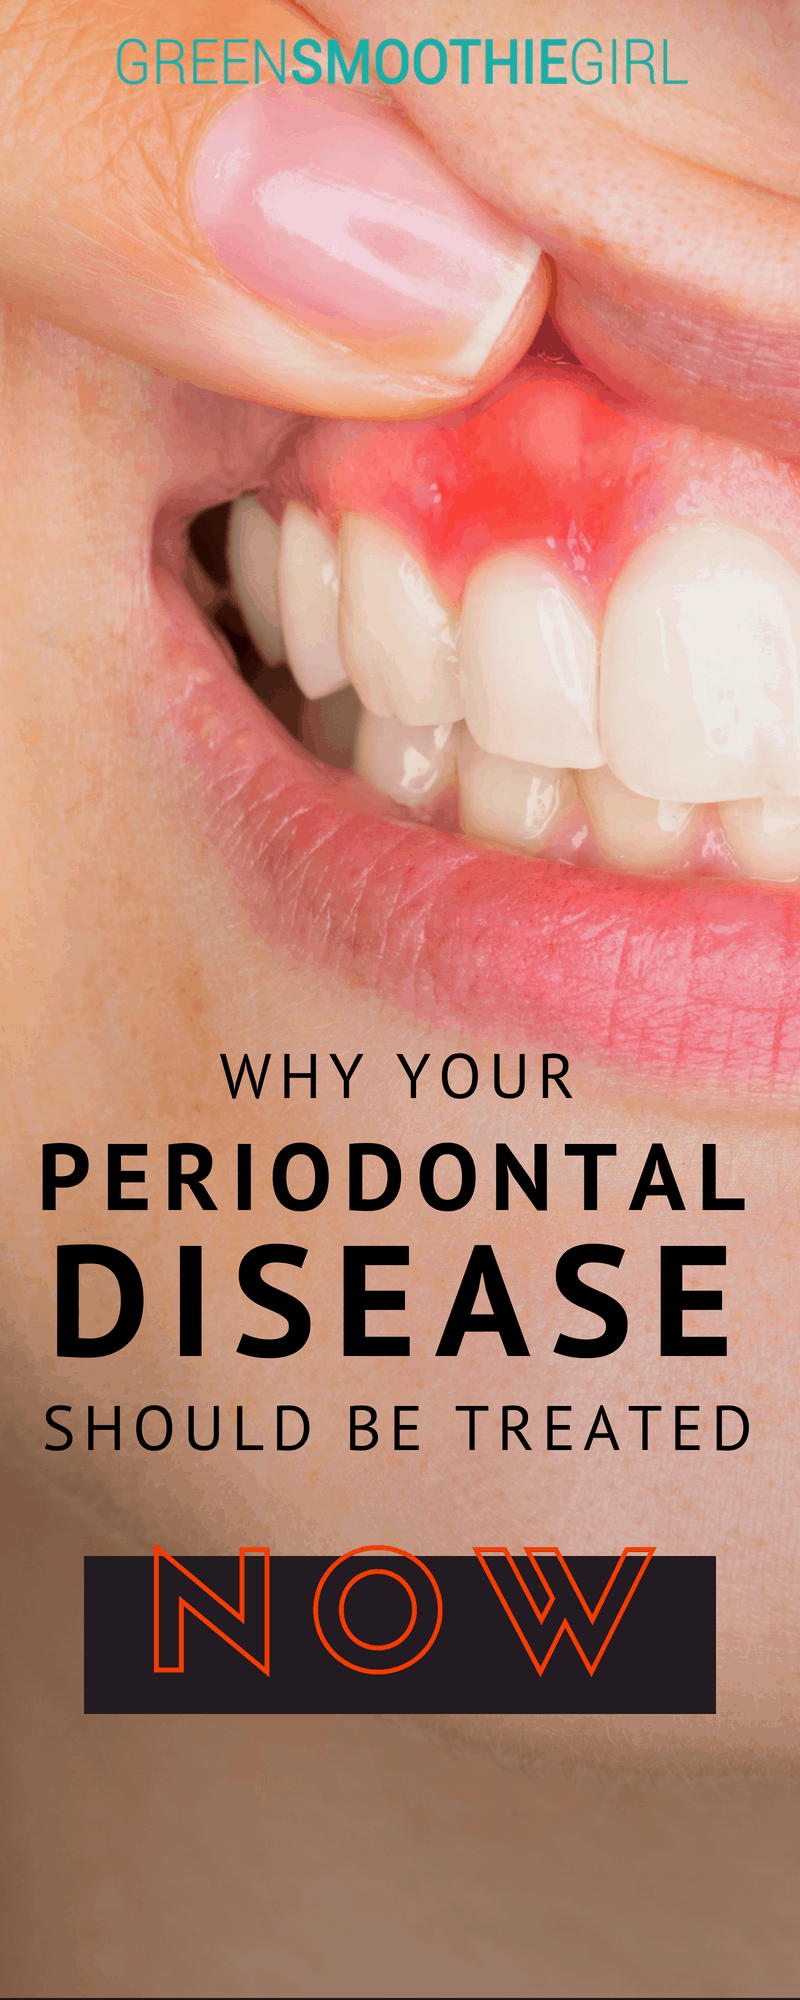 Why Your Periodontal Disease Should Be Treated Now | Green Smoothie Girl